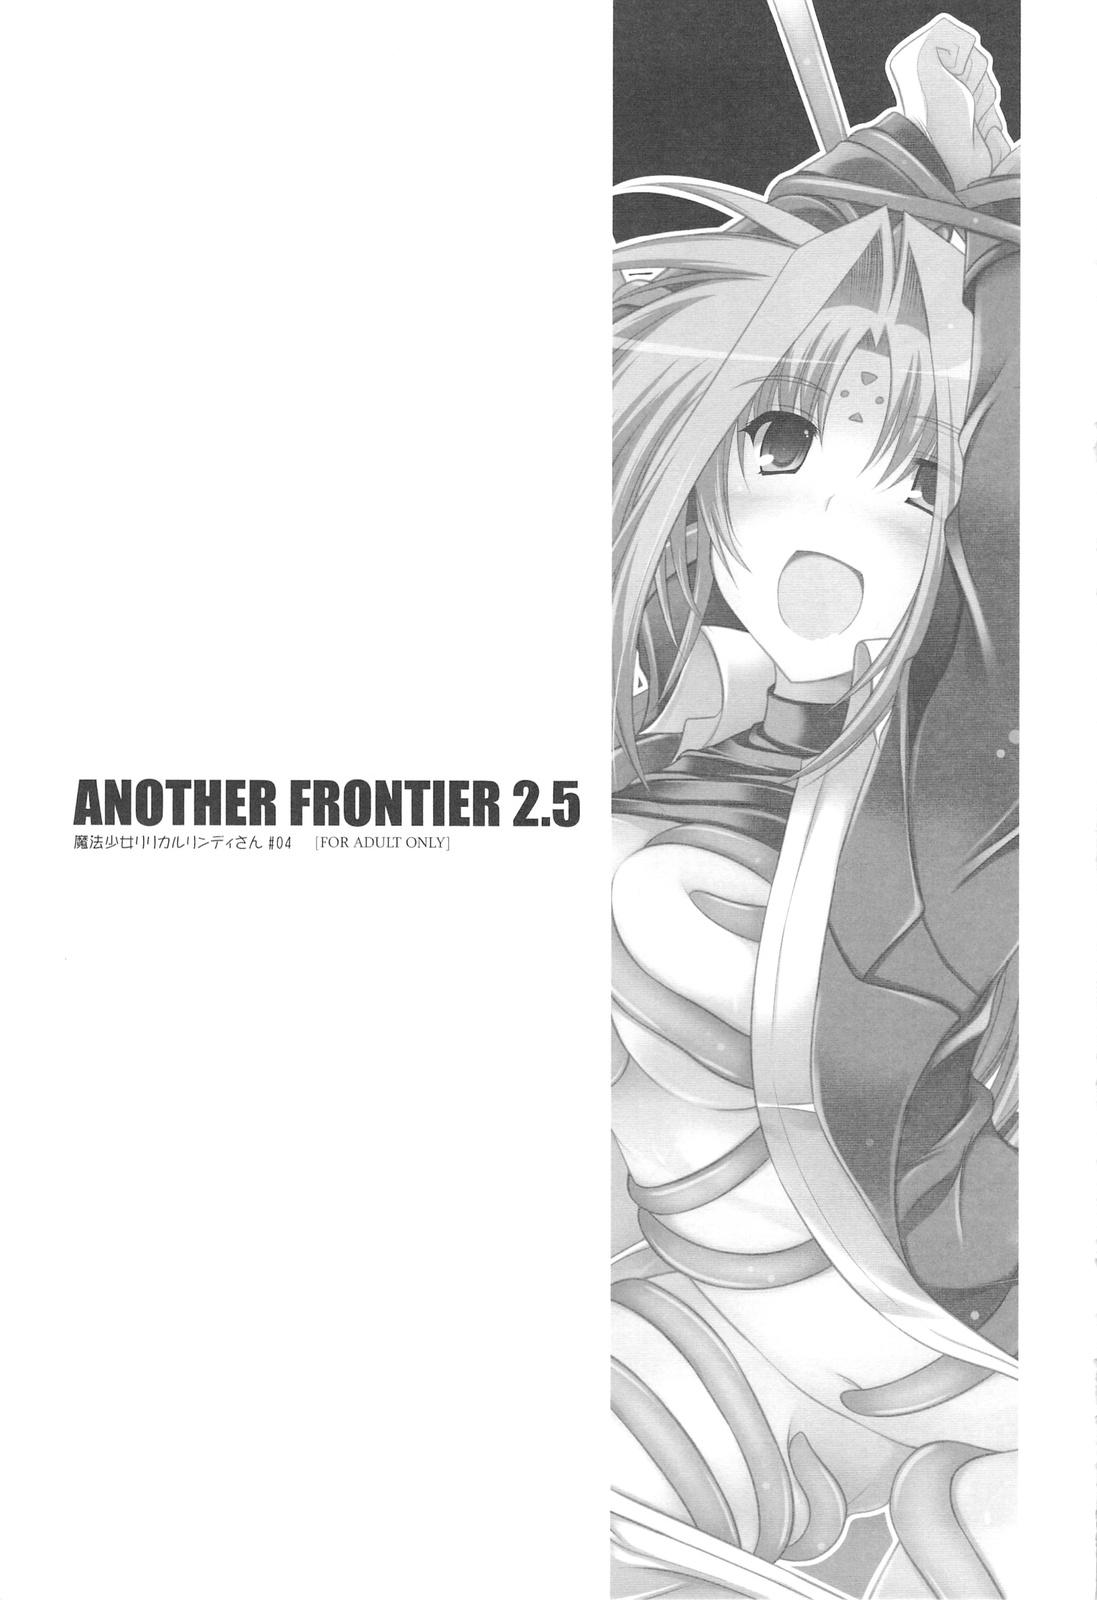 ANOTHER FRONTIER 2.5 Mahou Shoujo Lyrical Lindy san #04 1